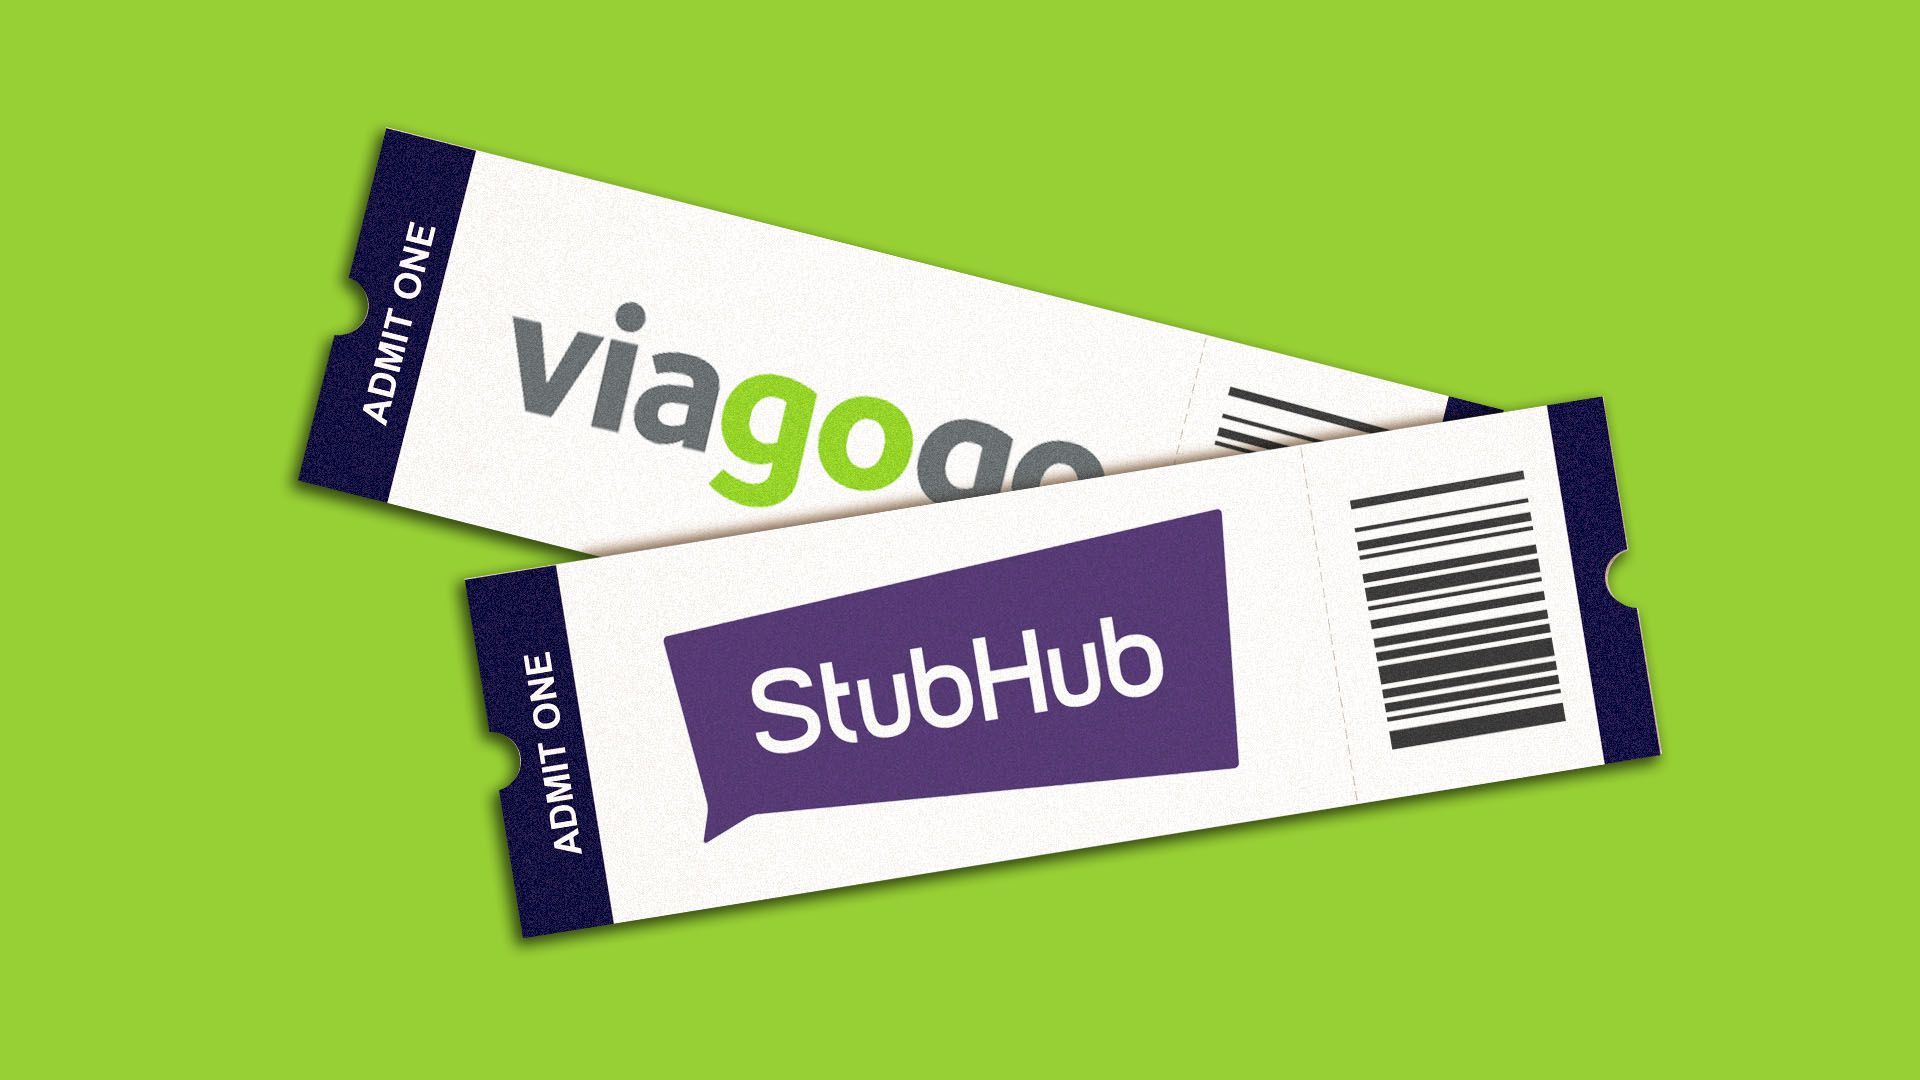 Illustration of two tickets, one with the Stubhub logo and one with the Viagogo logo